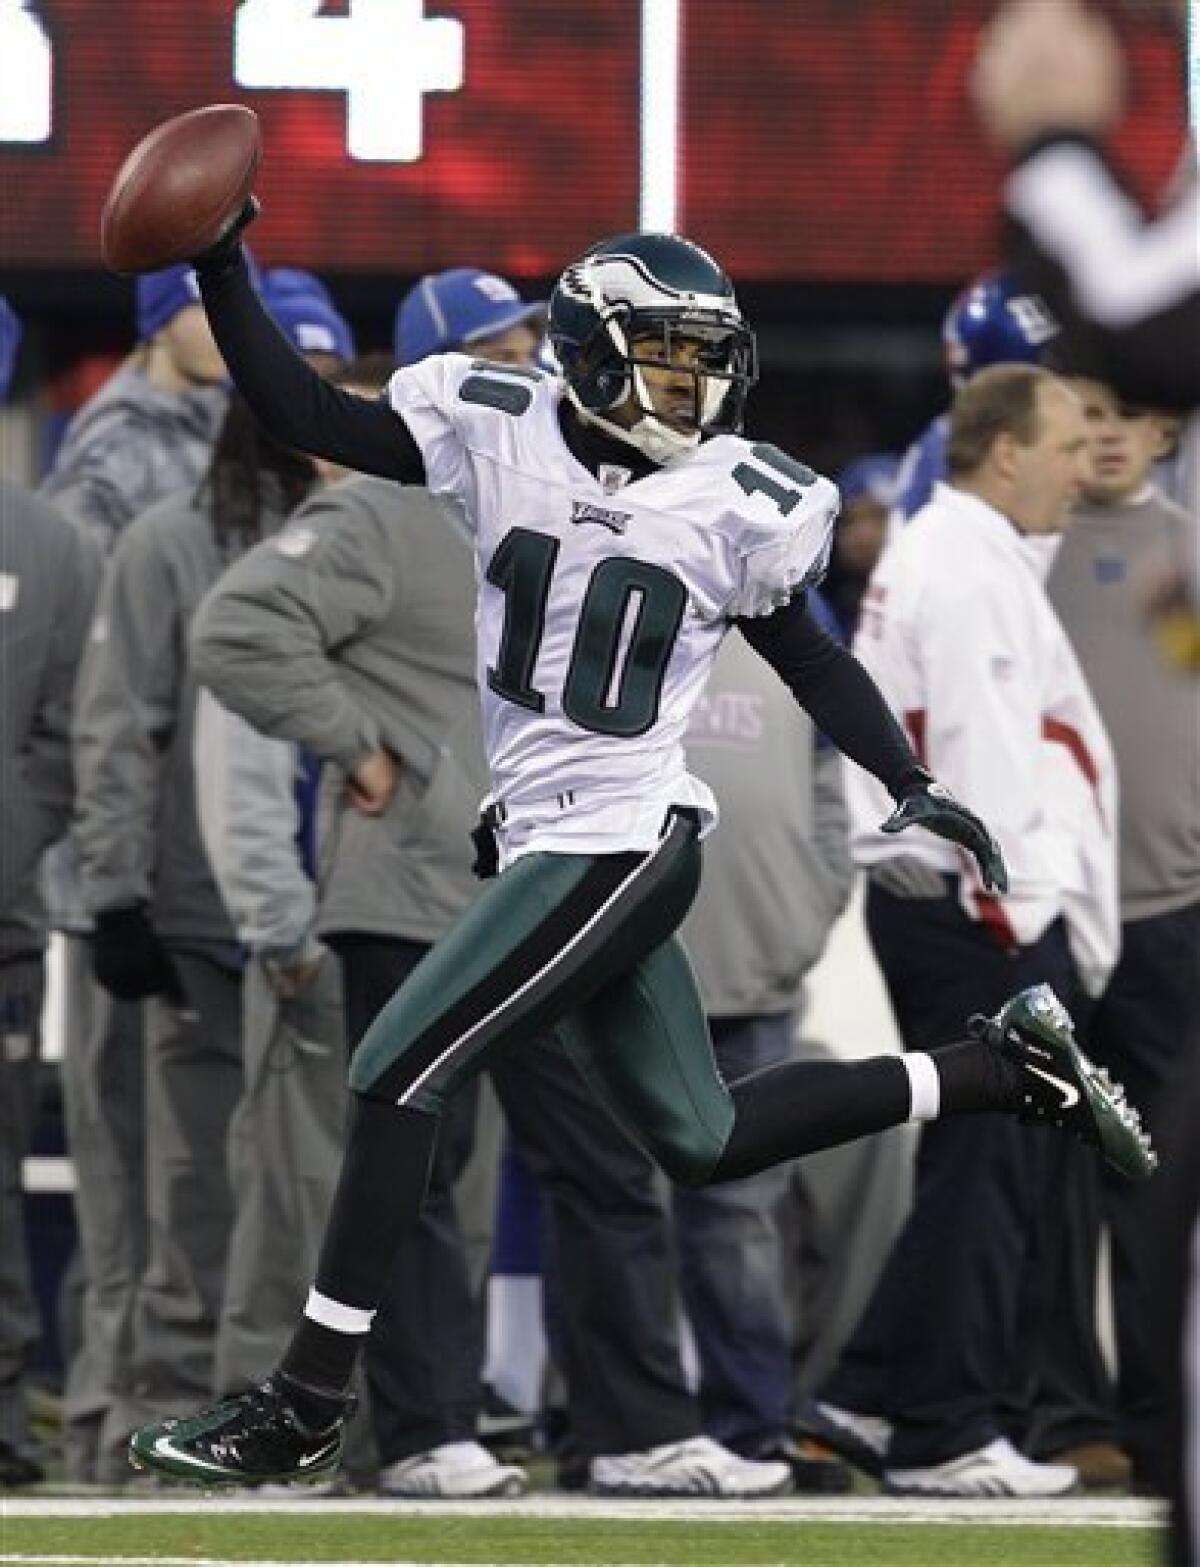 Giants' Surprising Season Ends With a Dominant Eagles Win - The